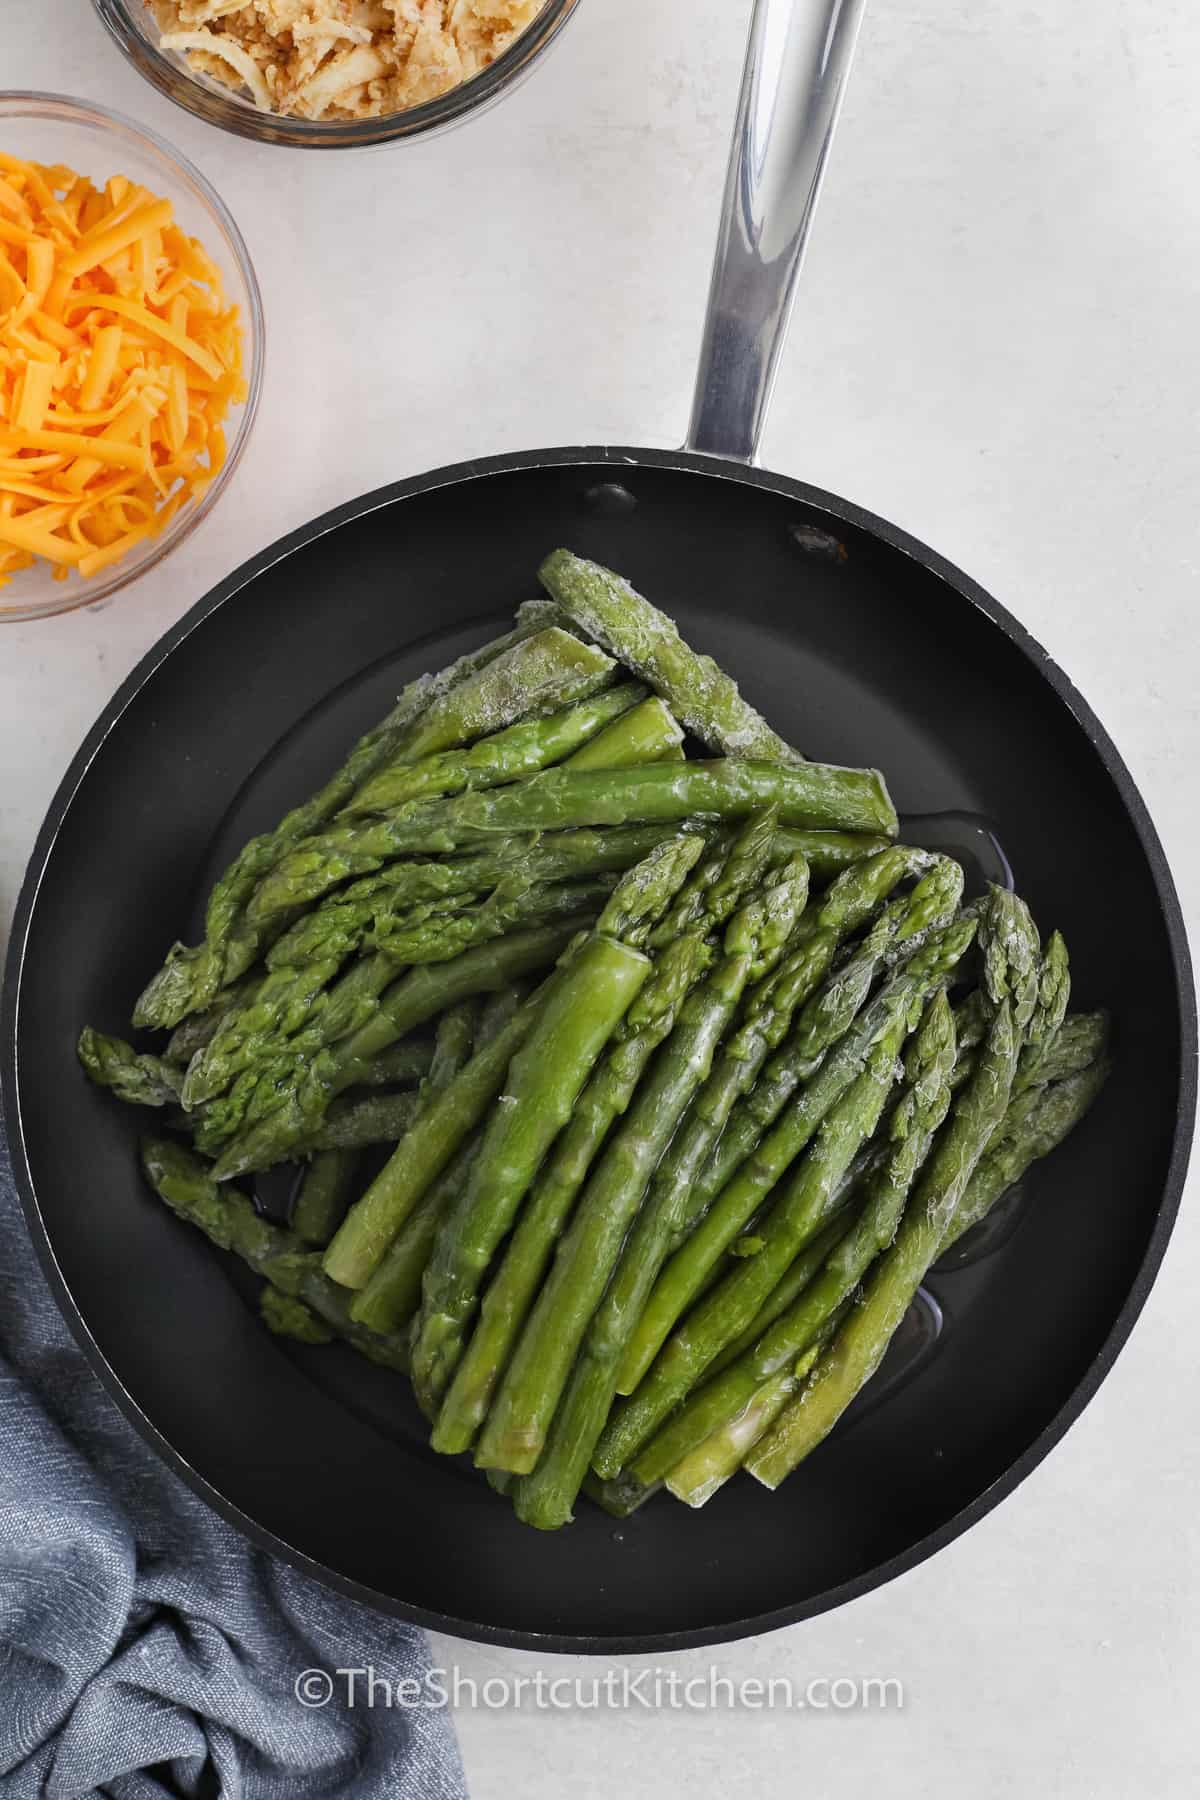 Frozen asparagus in a frying pan